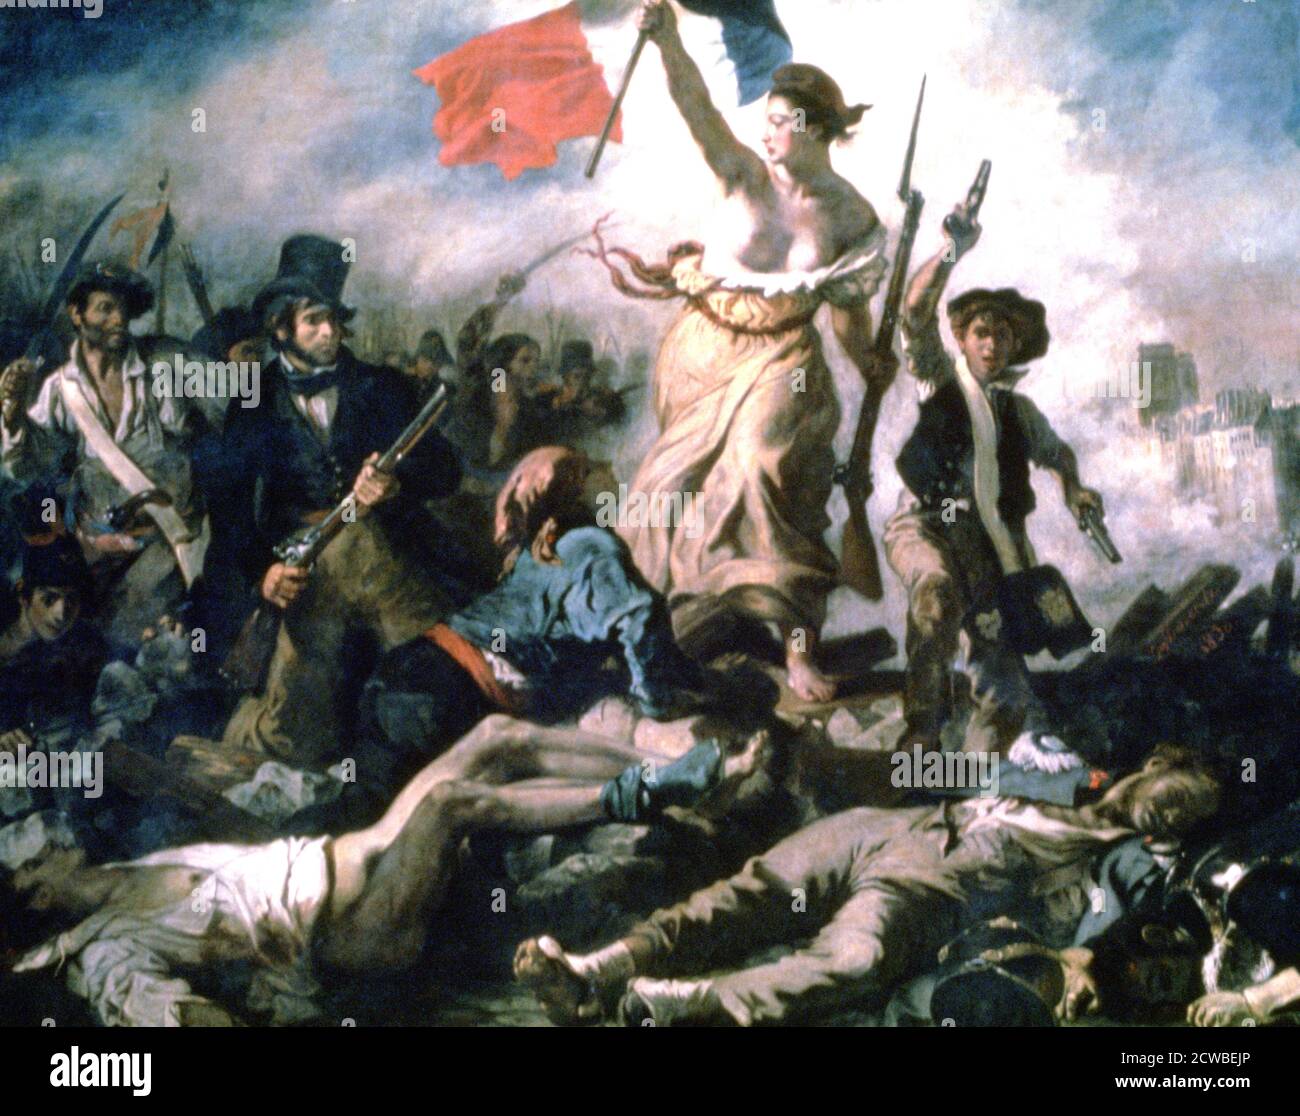 Liberty Leading the People', 1830 Artist: Eugene Delacroix. Painted to commemorate the July Revolution of 1830. A woman personifying Liberty leads the people forward over the bodies of the fallen. From the Louvre, Paris. Stock Photo